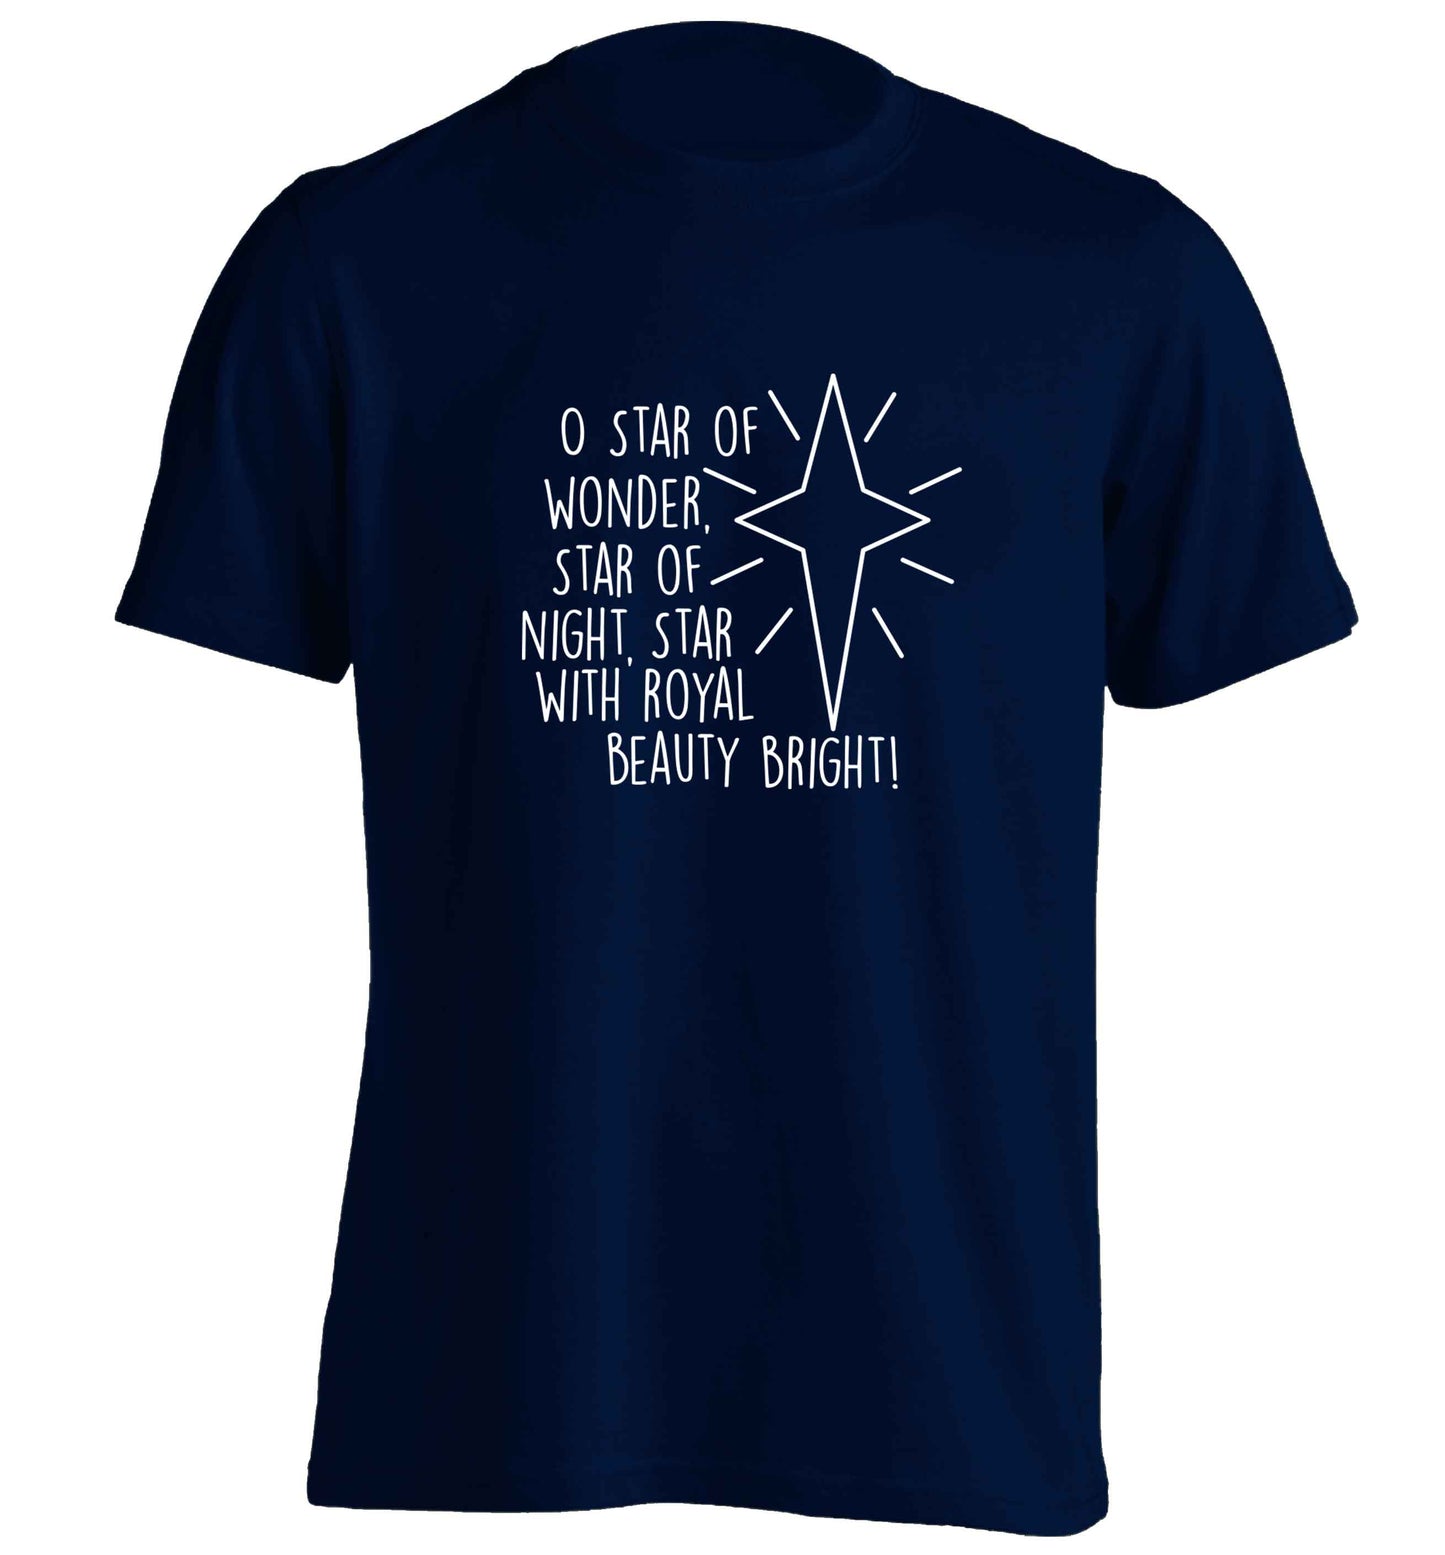 Oh star of wonder star of night, star with royal beauty bright adults unisex navy Tshirt 2XL